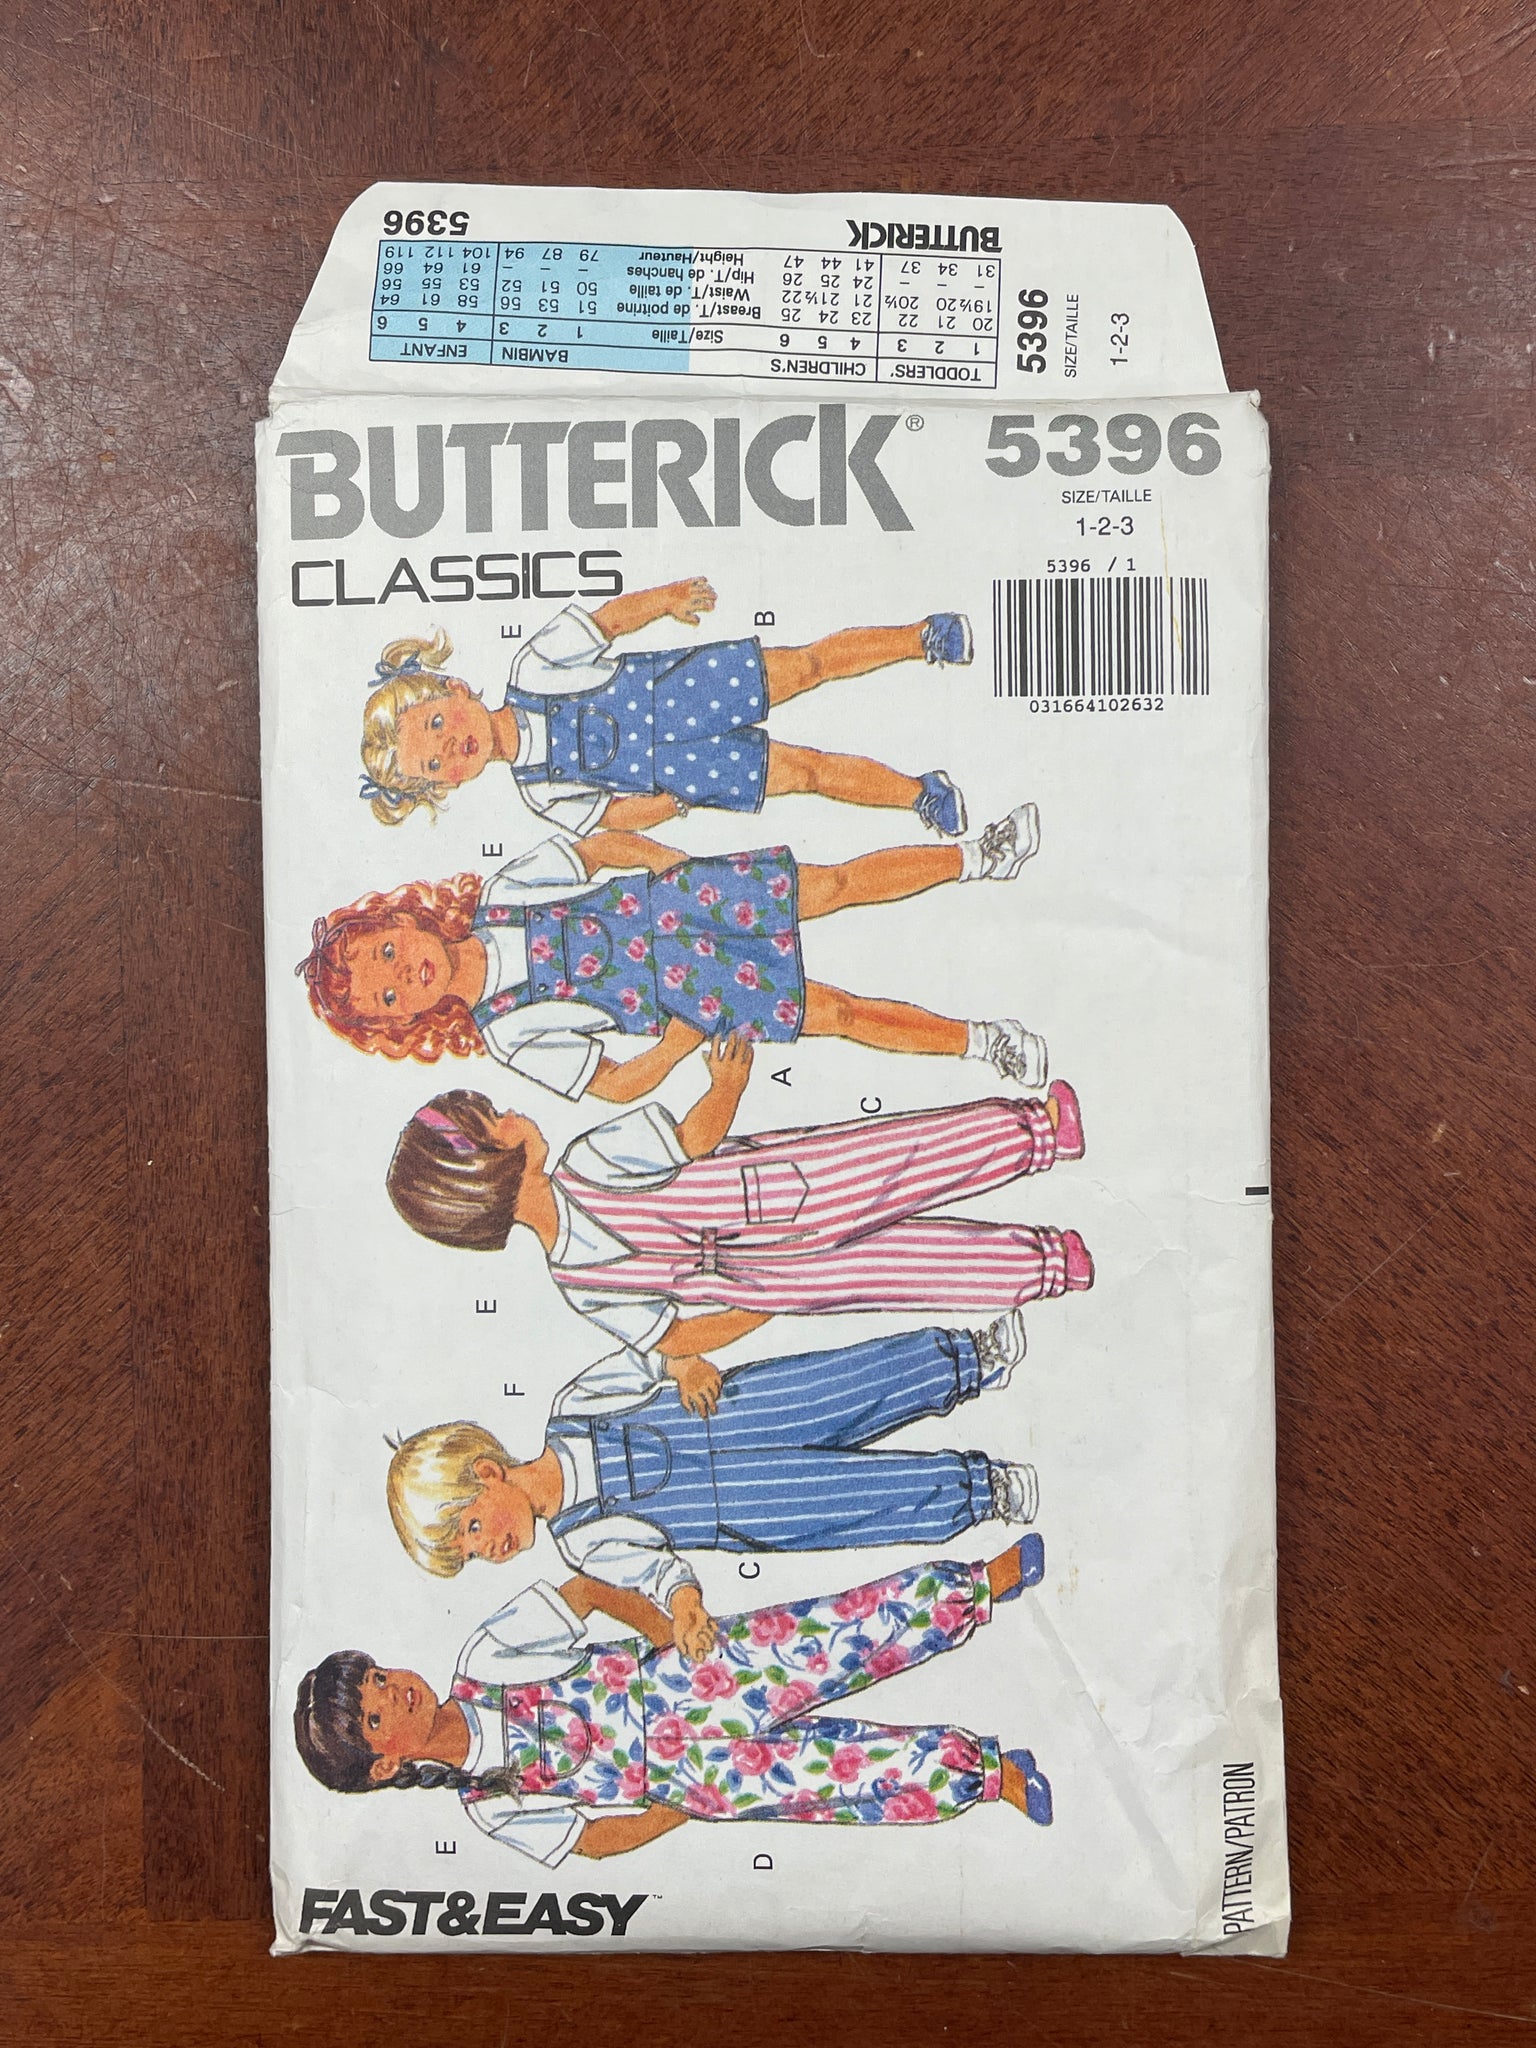 1991 Butterick 5396 Pattern - Child's Shirt and Overalls